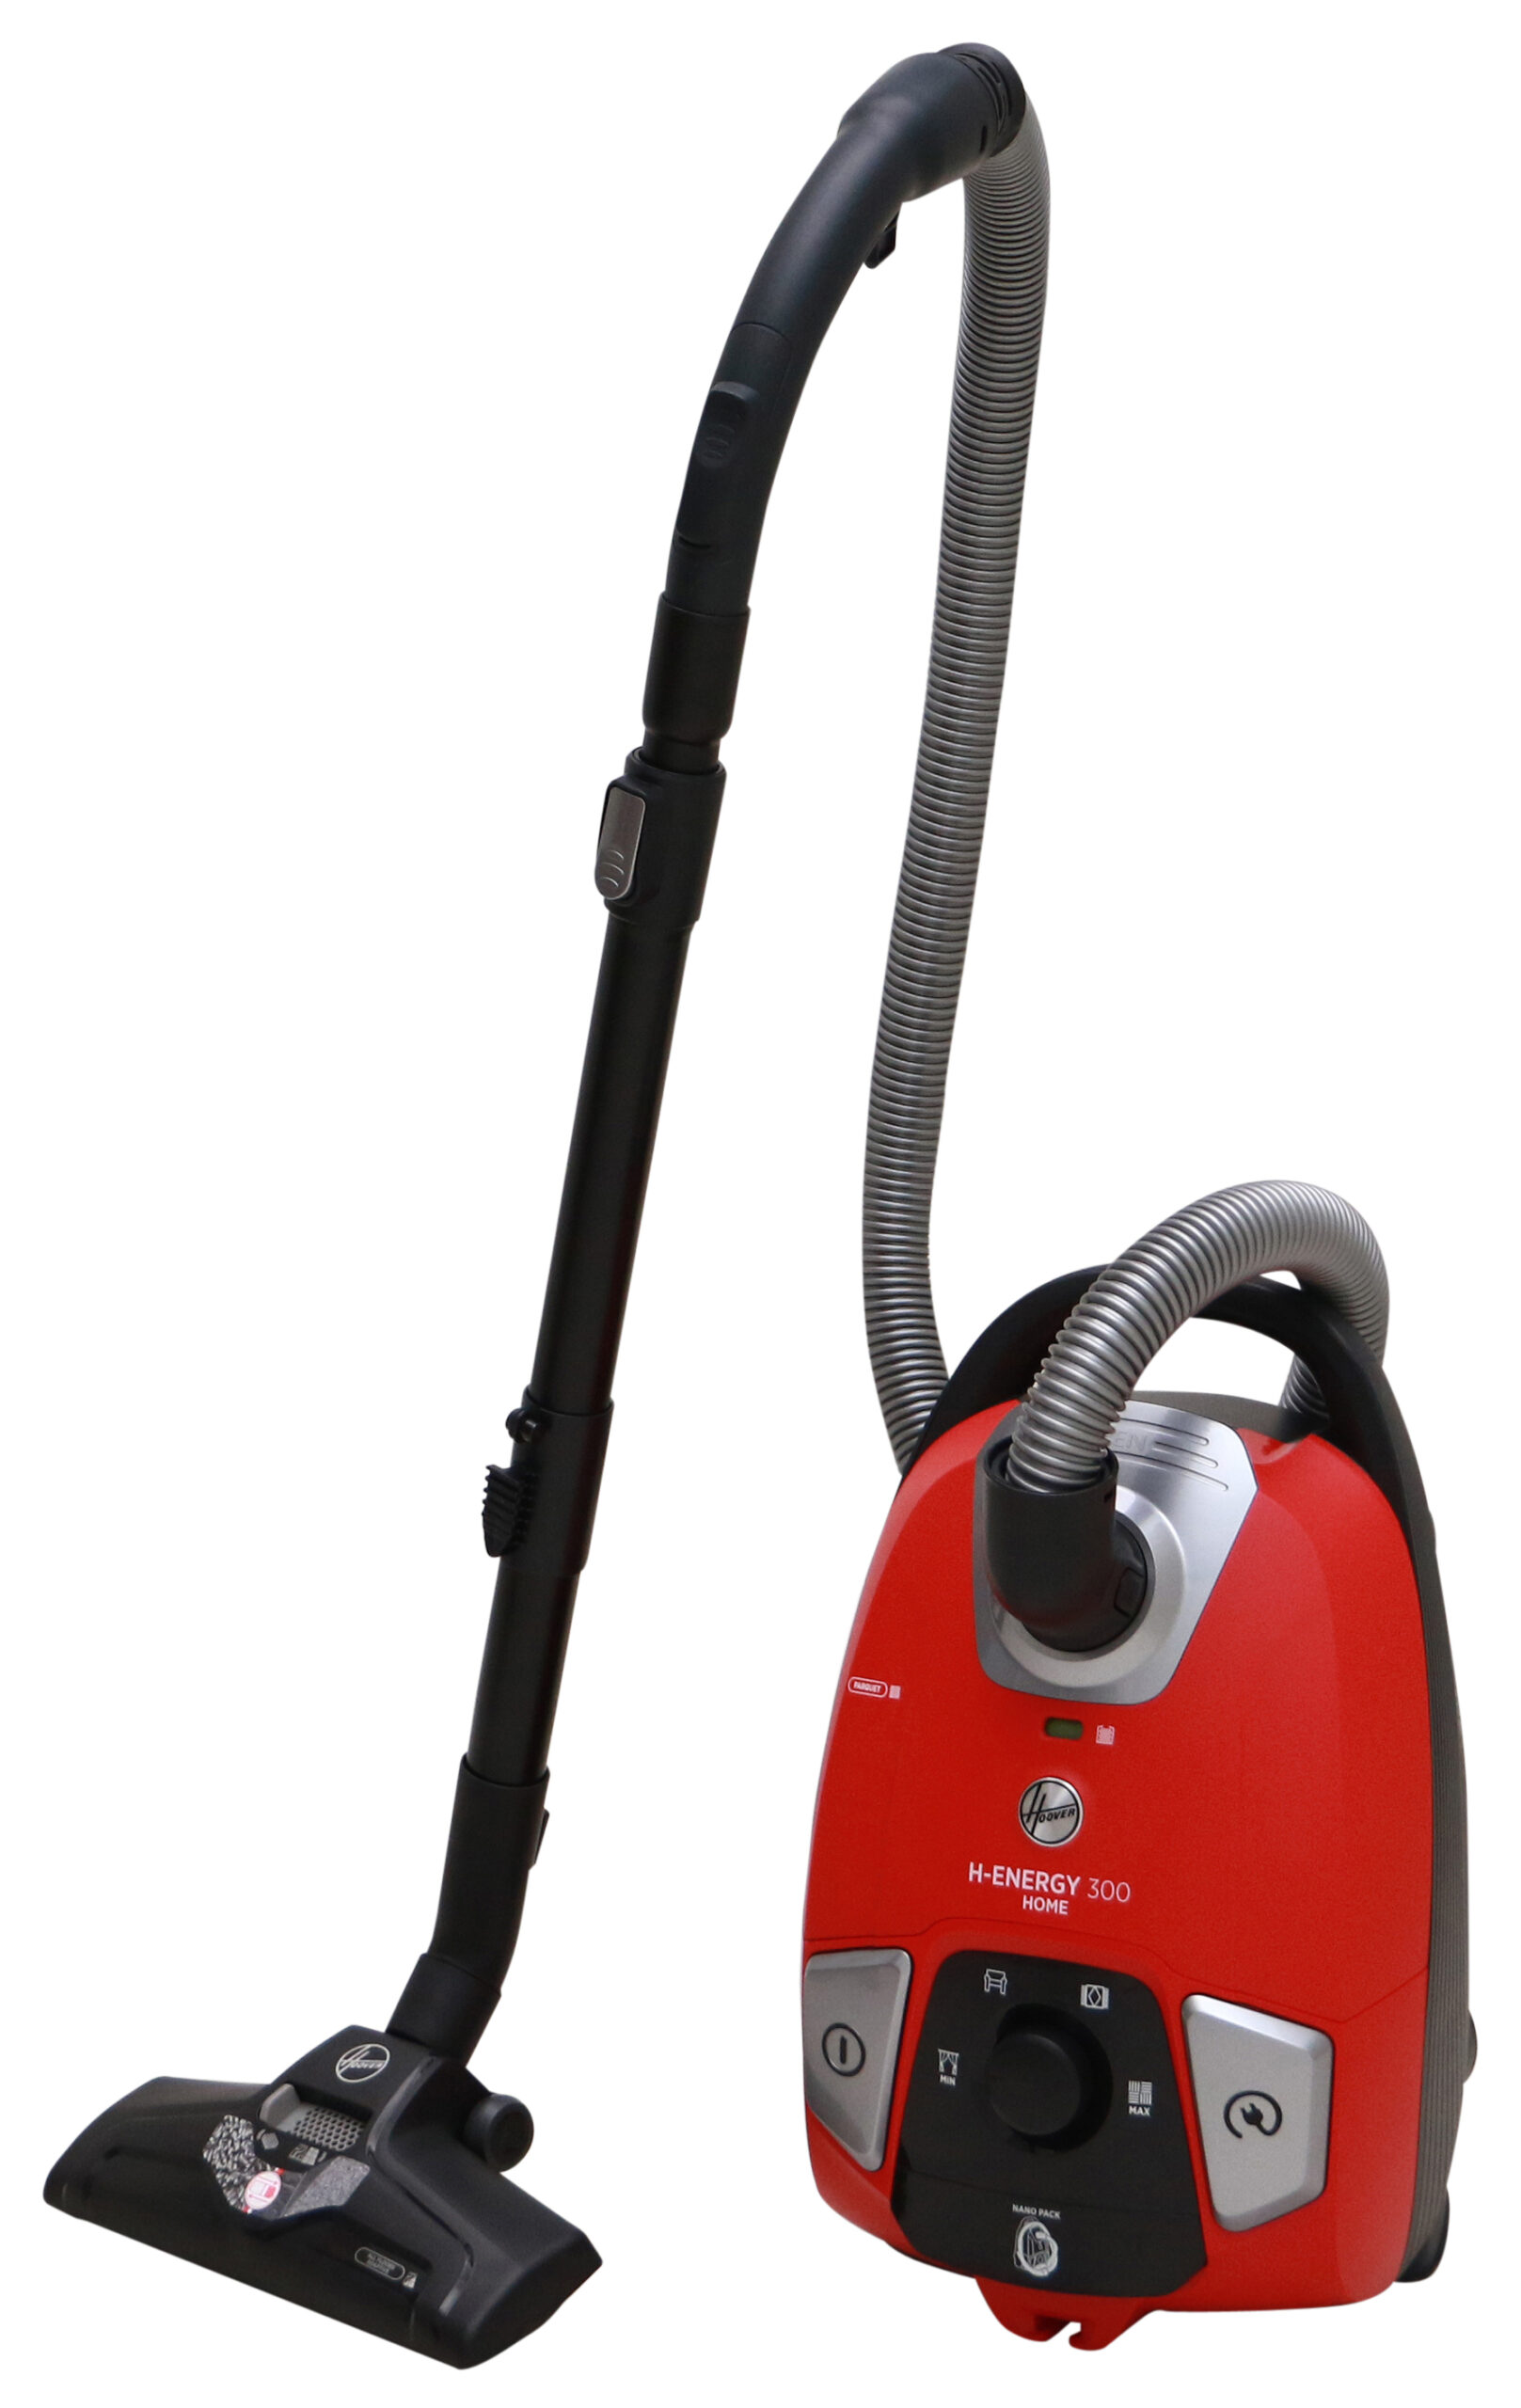 Hoover HE310HM 011 H-ENERGY 300